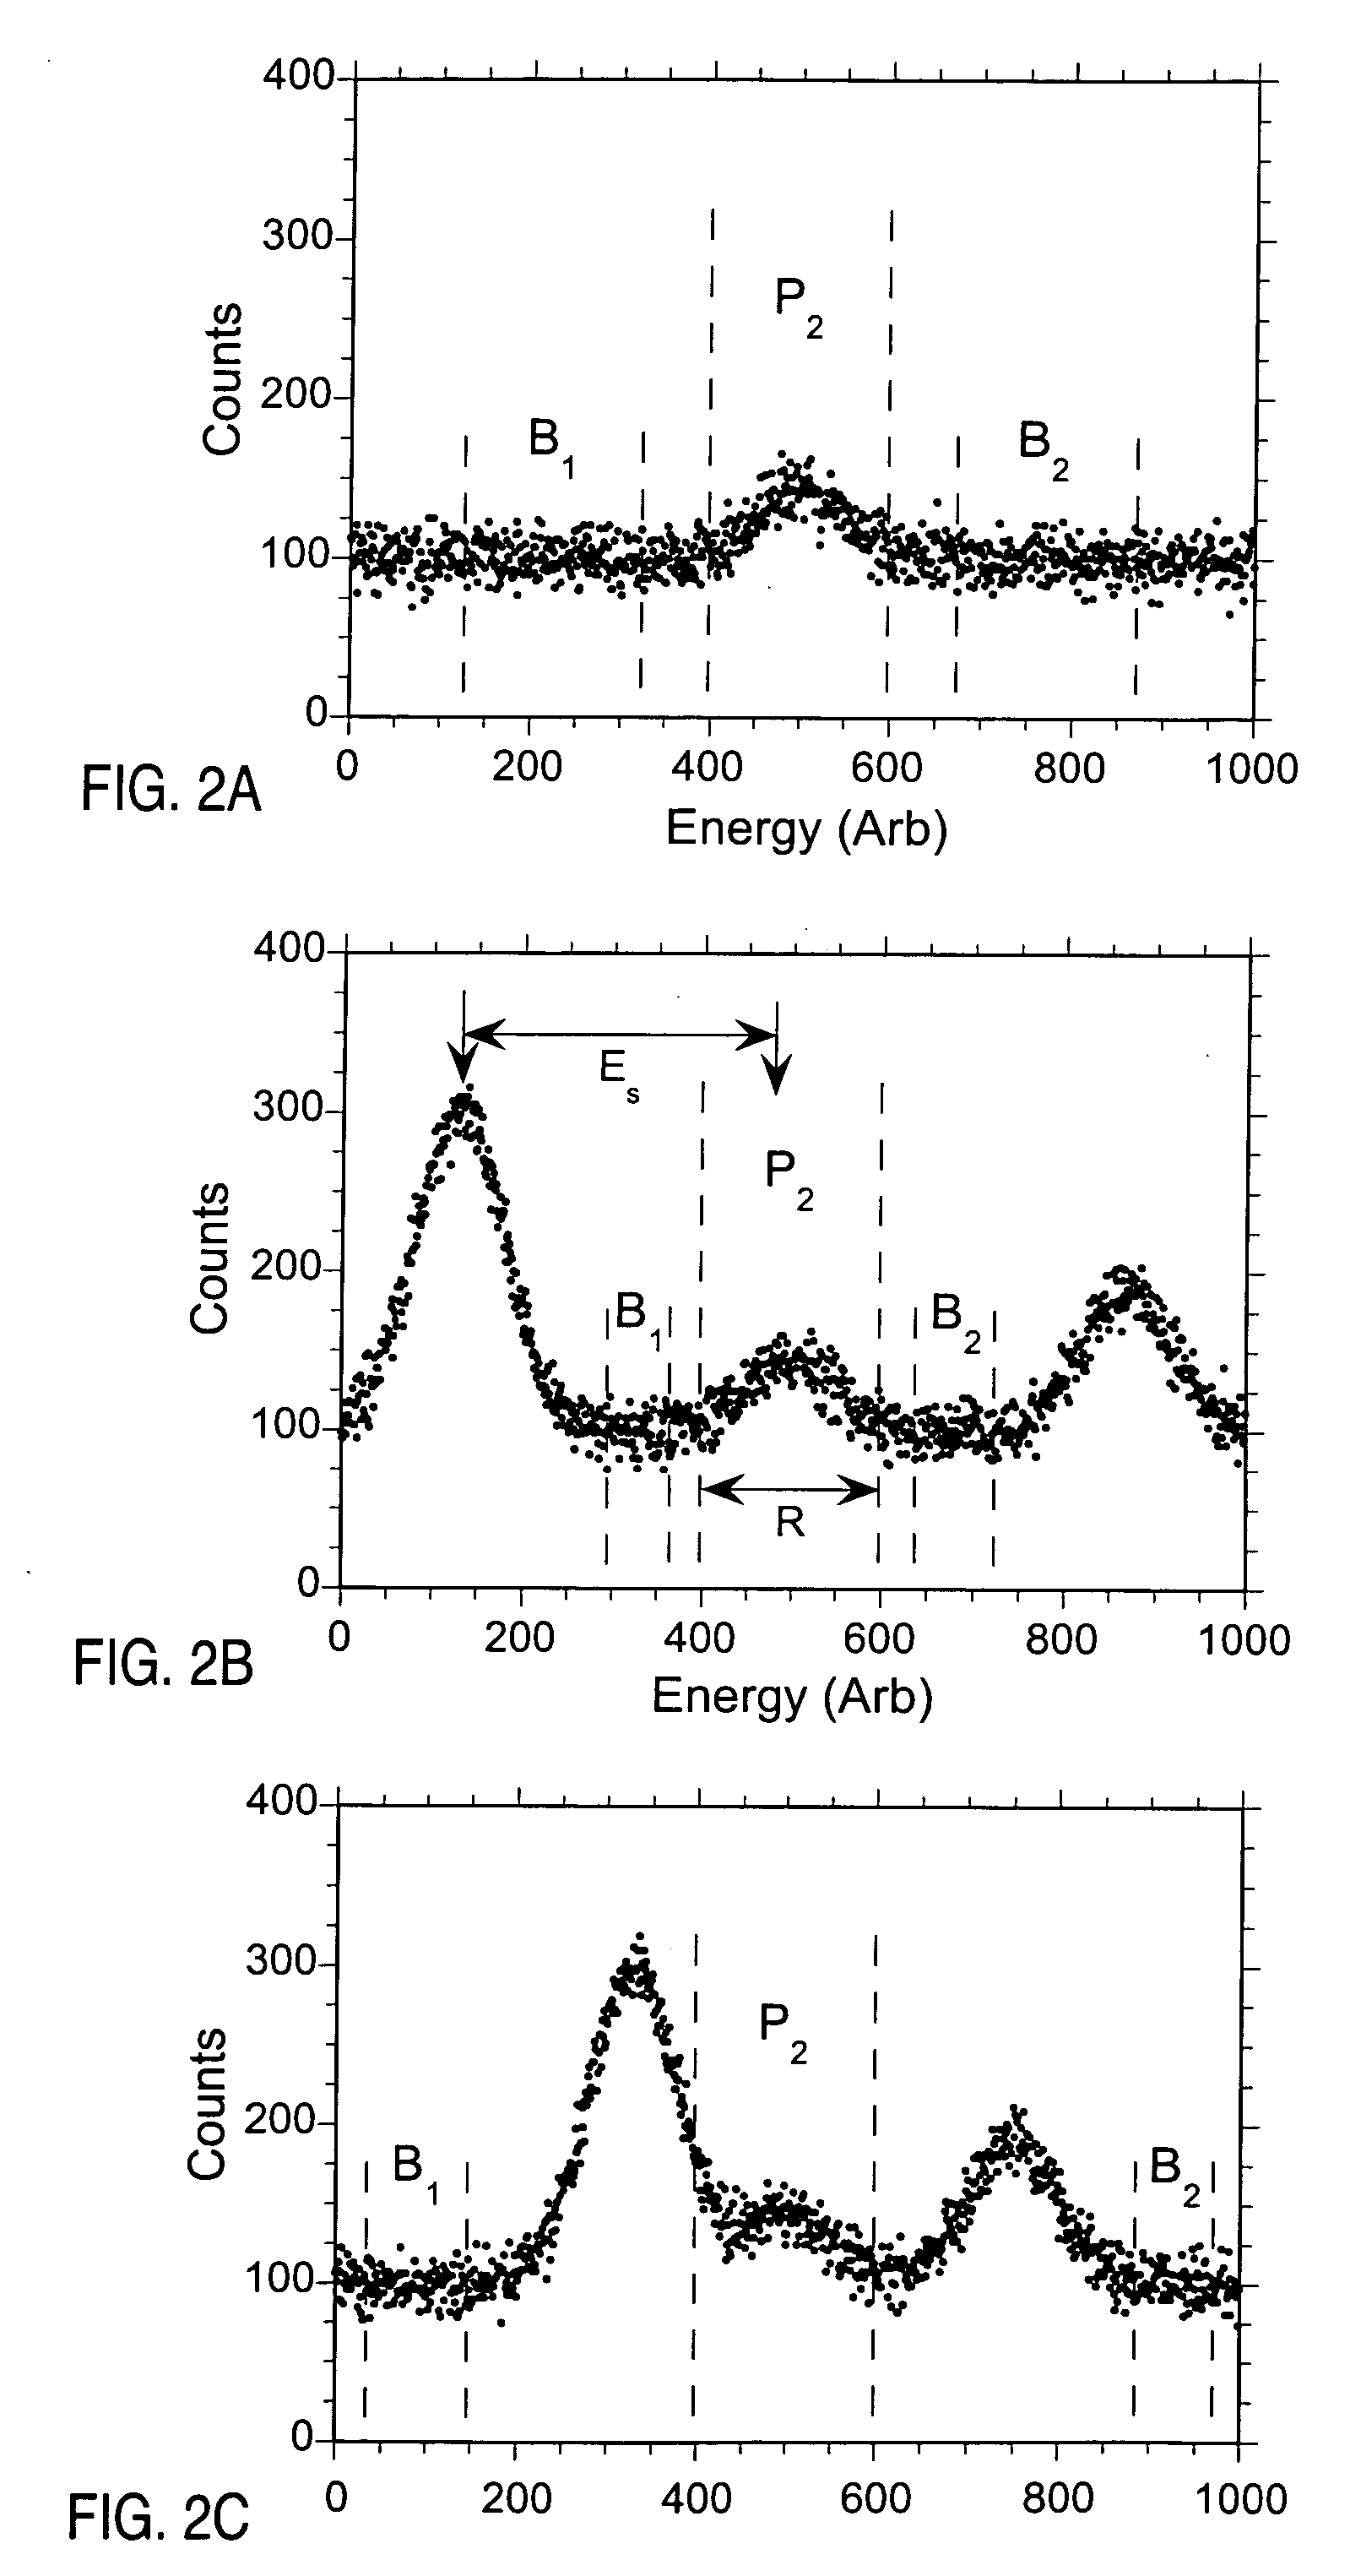 Method and apparatus for improving detection limits in x-ray and nuclear spectroscopy systems